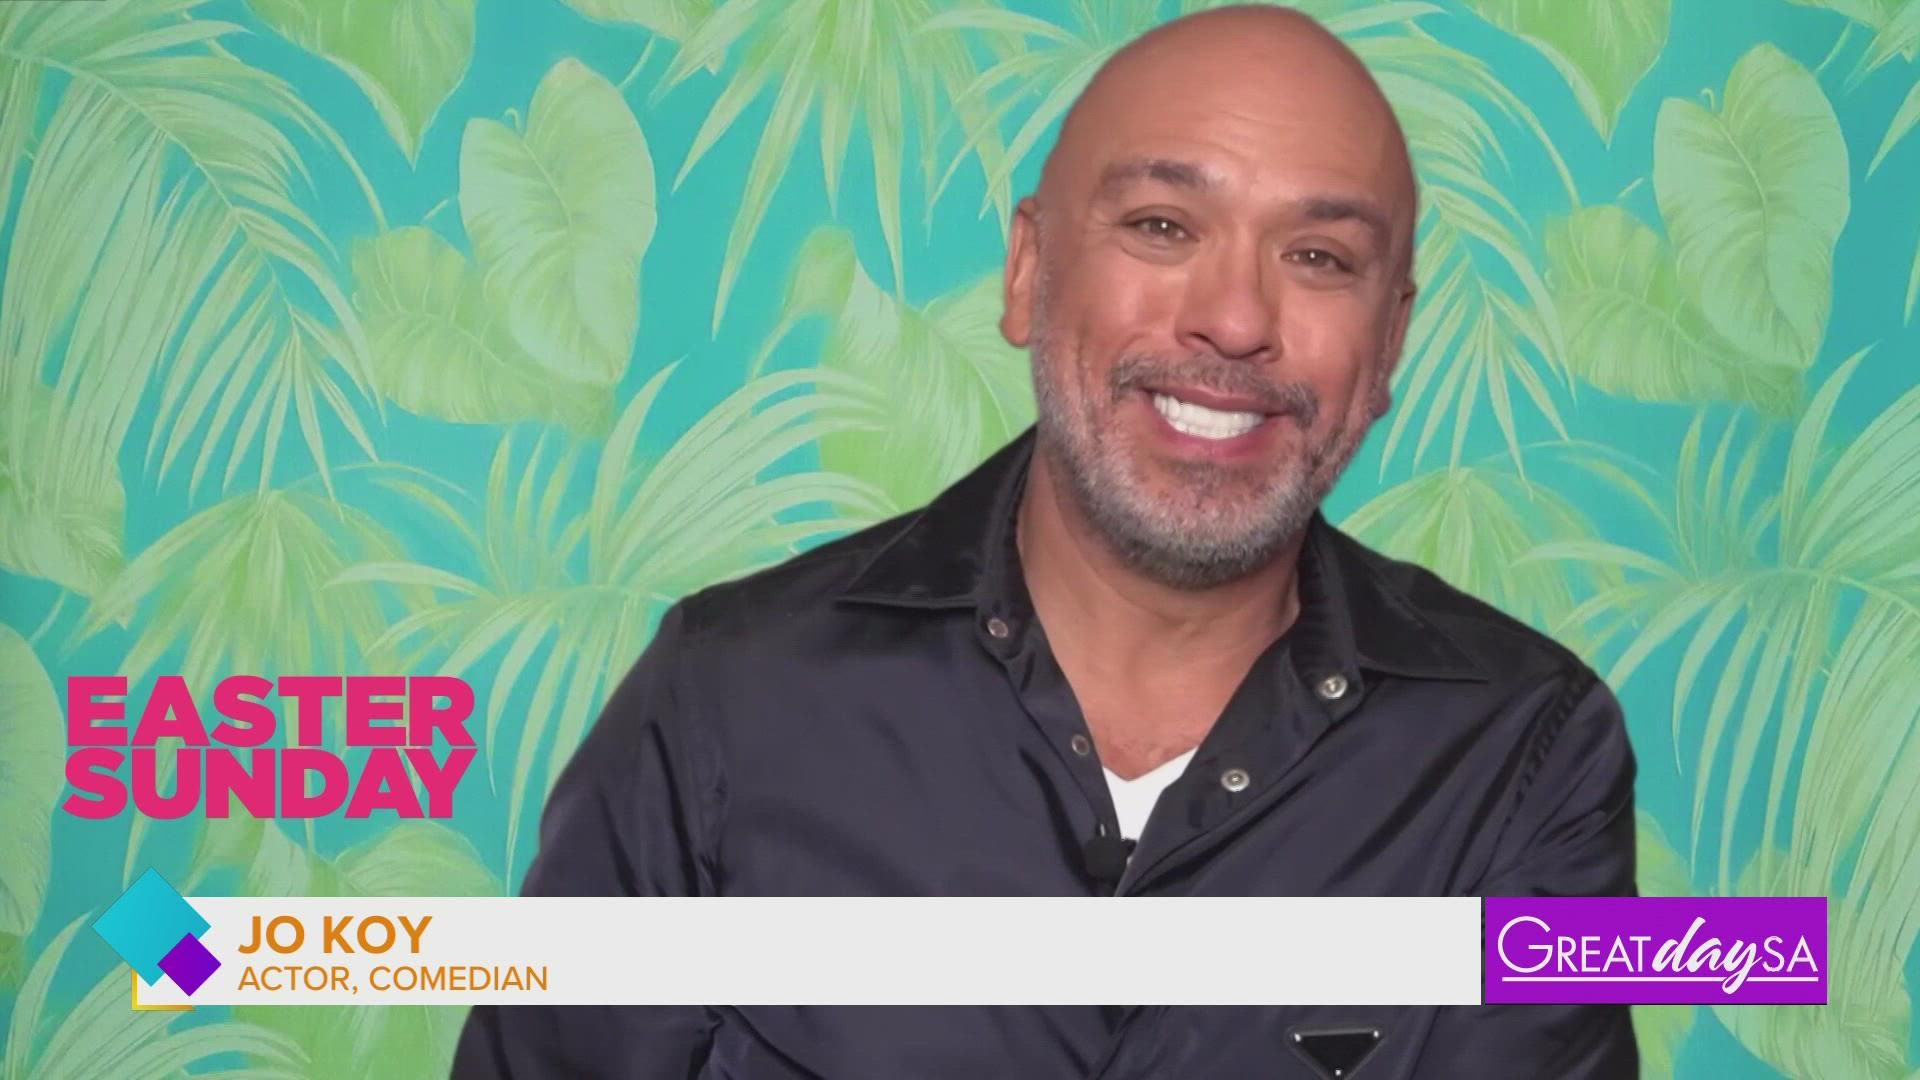 Jo Koy fills us in on his latest film 'Easter Sunday'